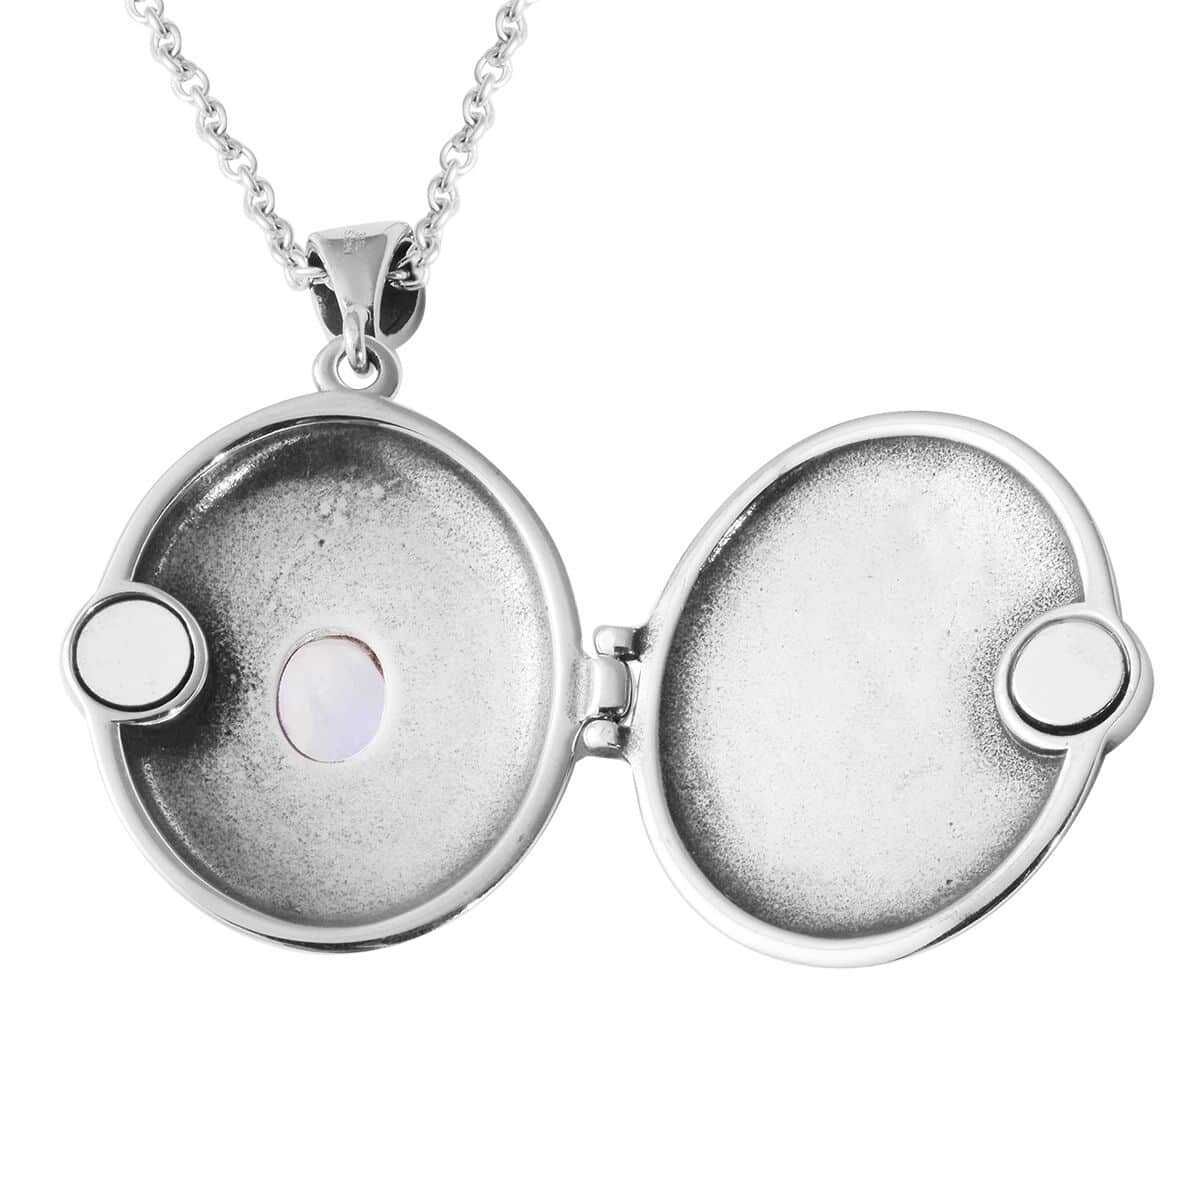 Sri Lankan Silver Moonstone Locket Pendant Necklace in Black Oxidized Stainless Steel 24 Inches image number 3